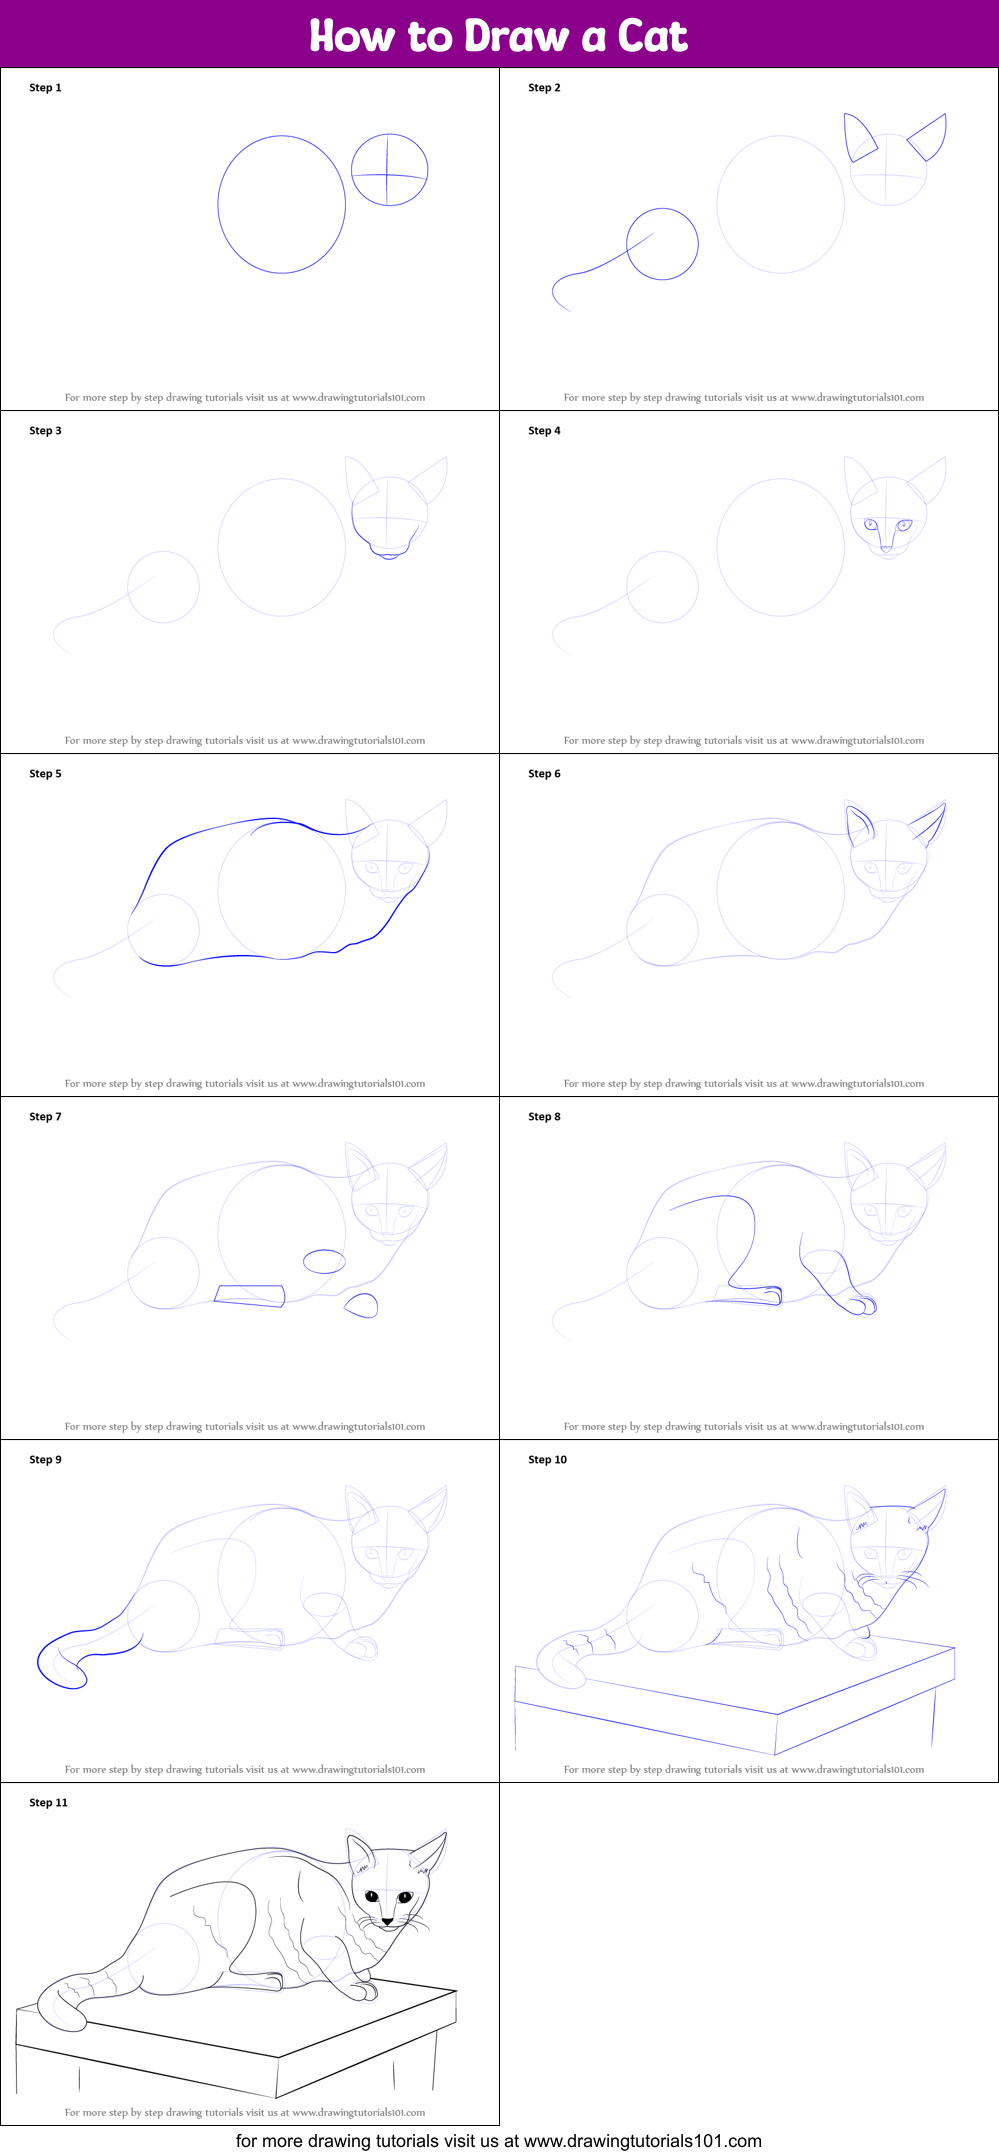 How to Draw a Cat printable step by step drawing sheet